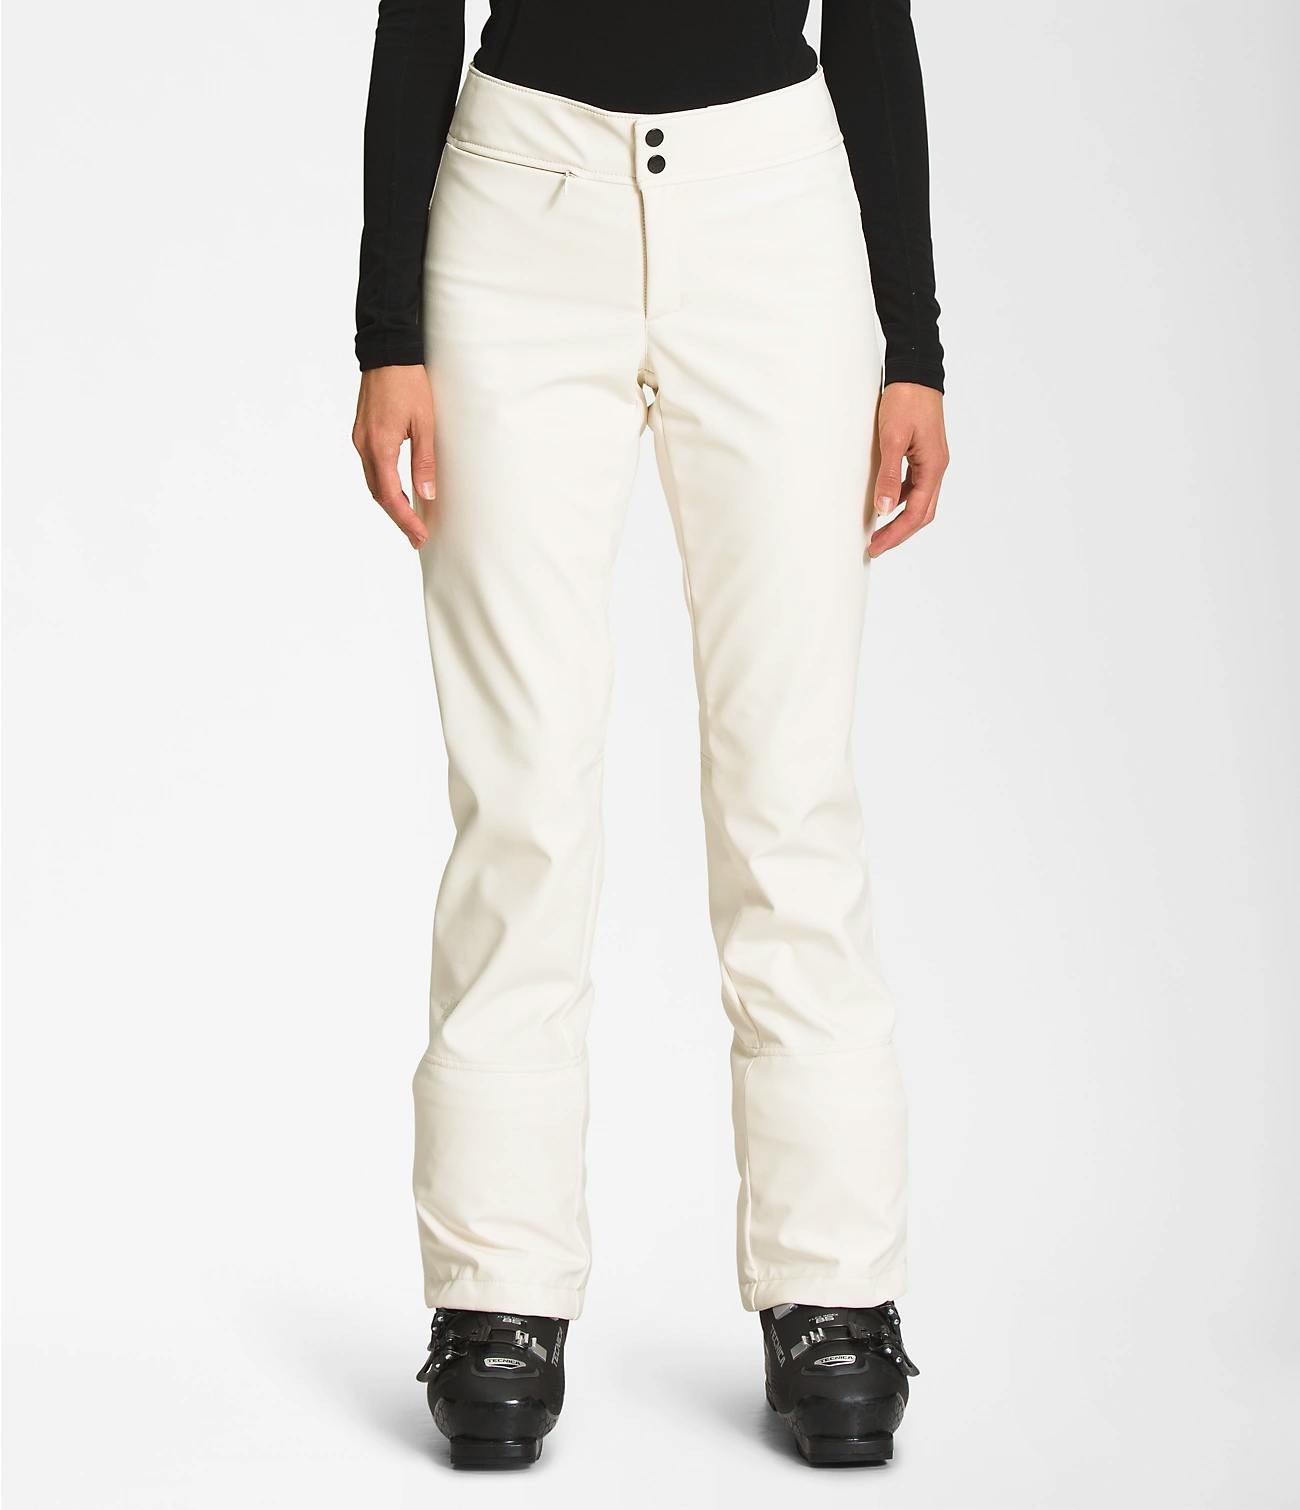 The North Face Women's Apex STH Pants